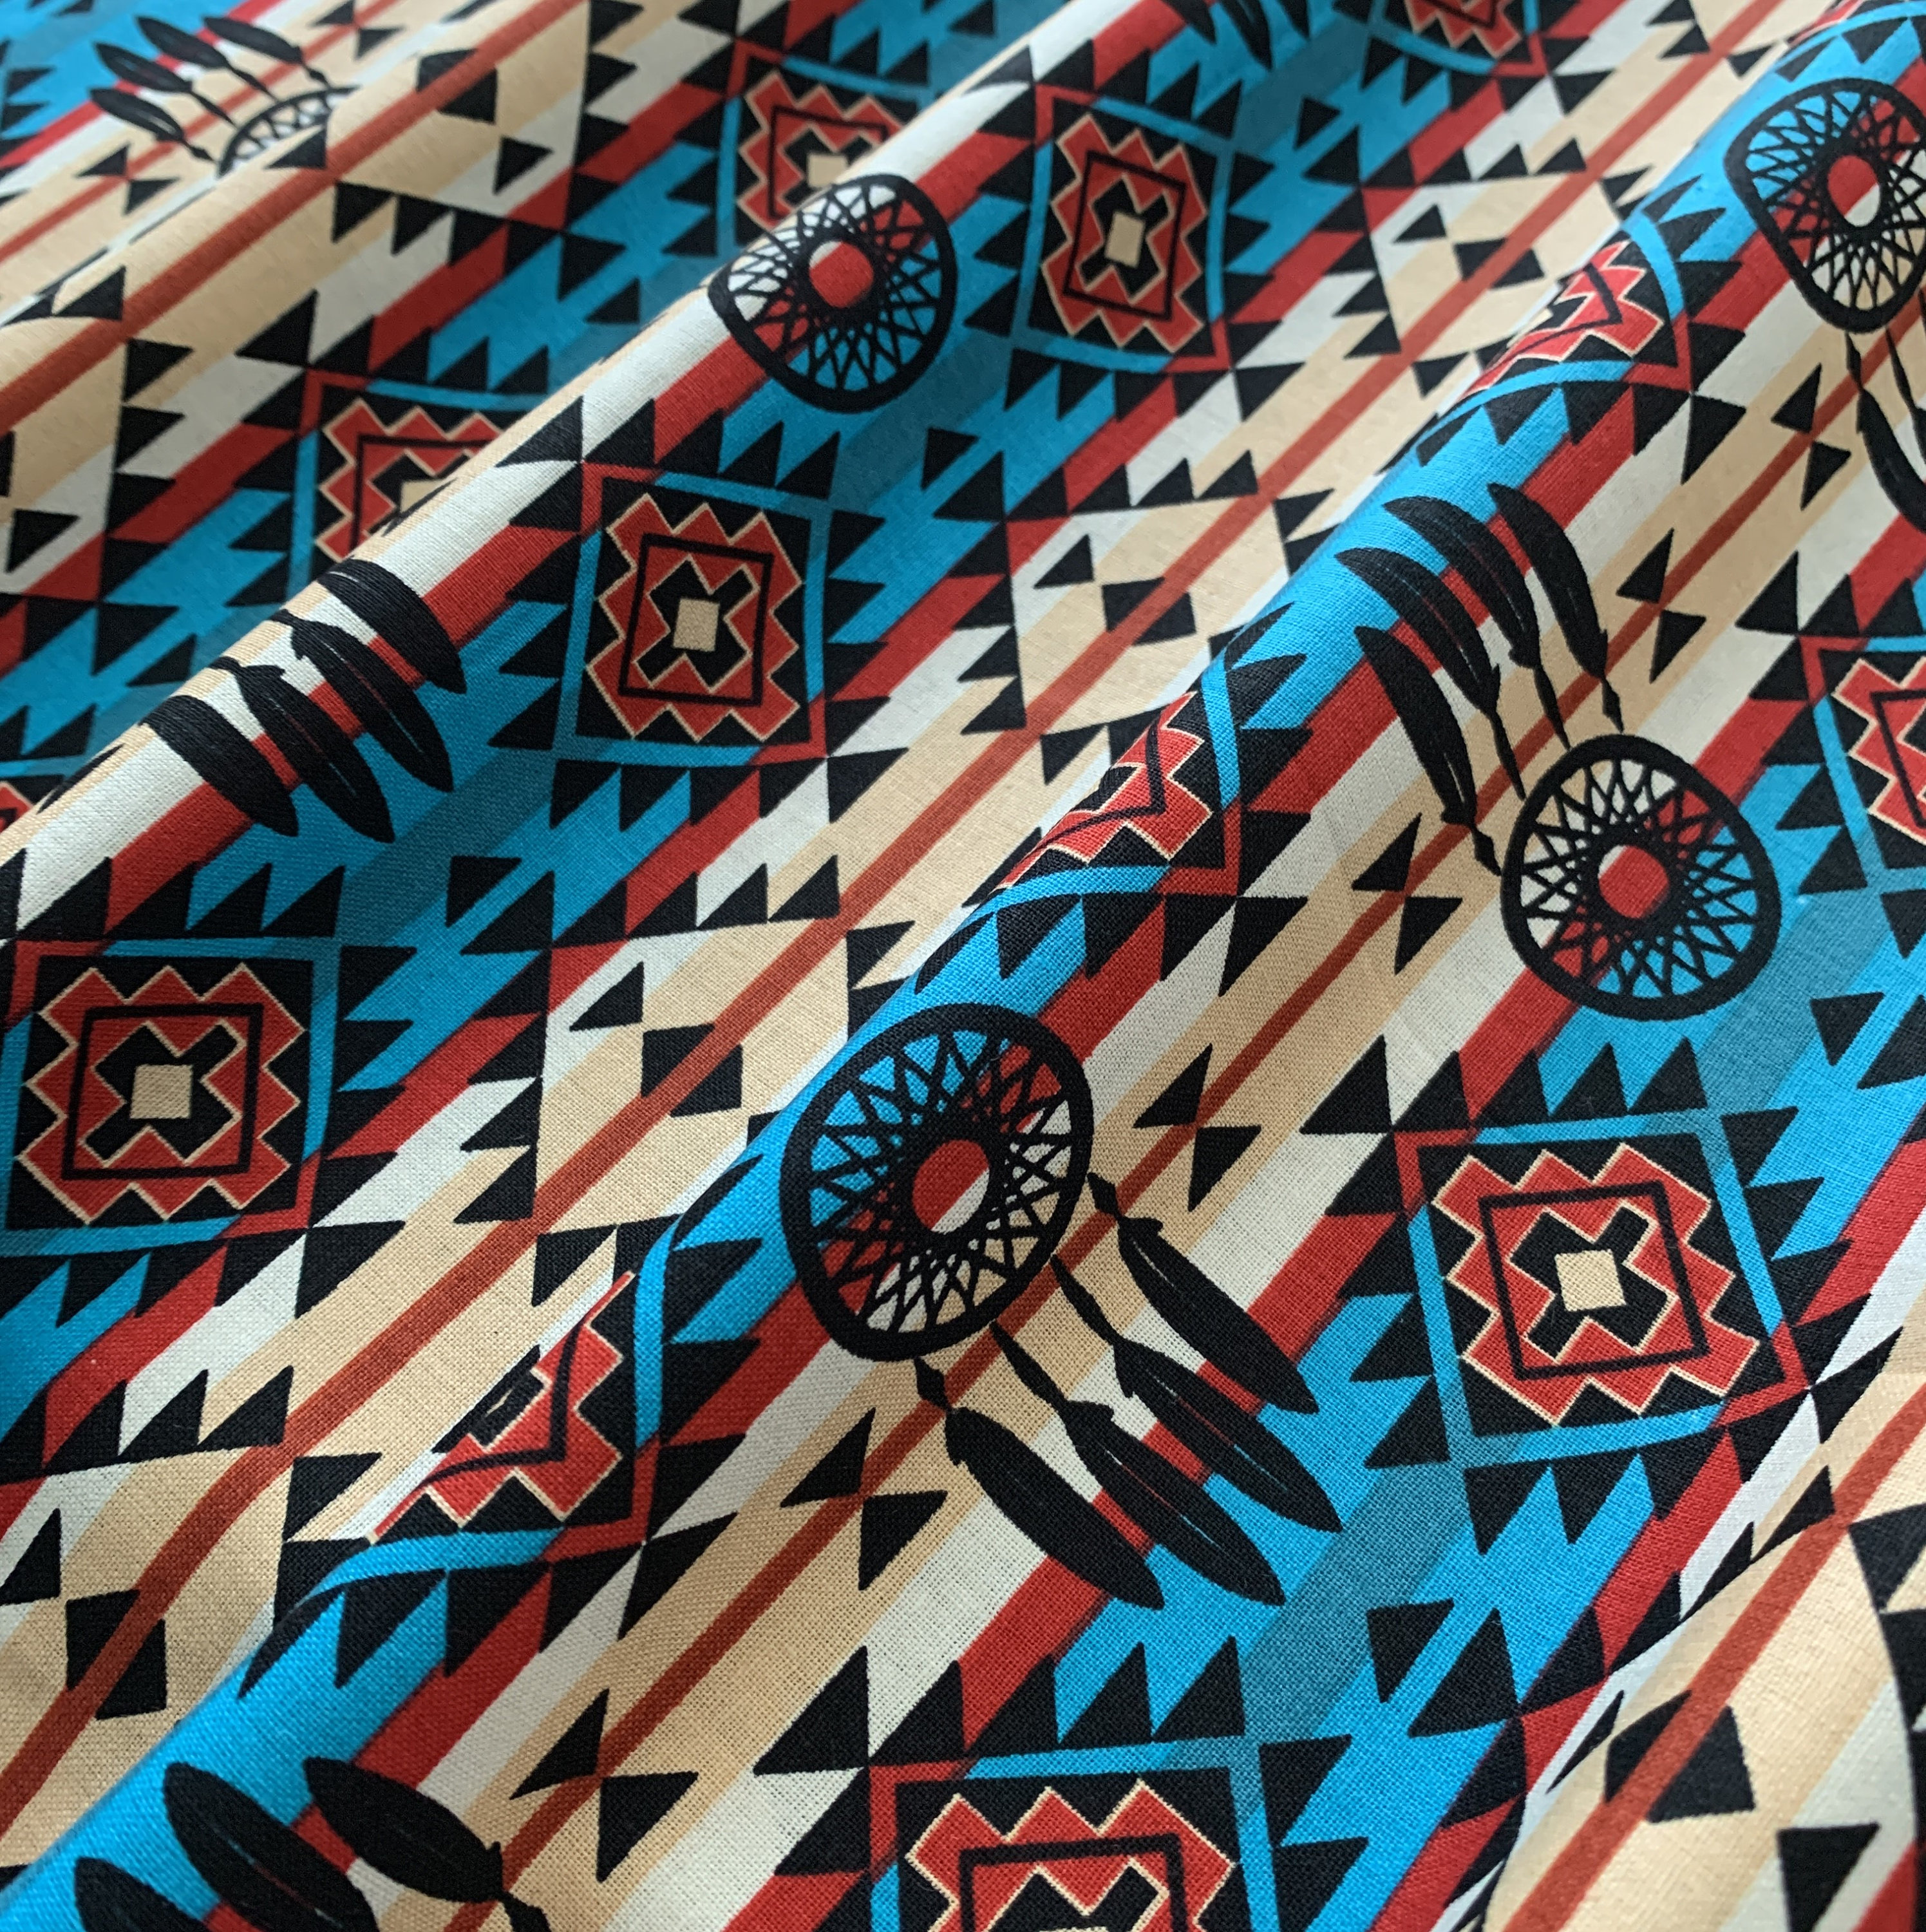 Western Boho Fabric by The Yard 2 Yard, Cowhide Tribal Print Upholstery  Fabric forfor Kids Western Aztec Decorative Waterproof Outdoor Fabric  Bohemian